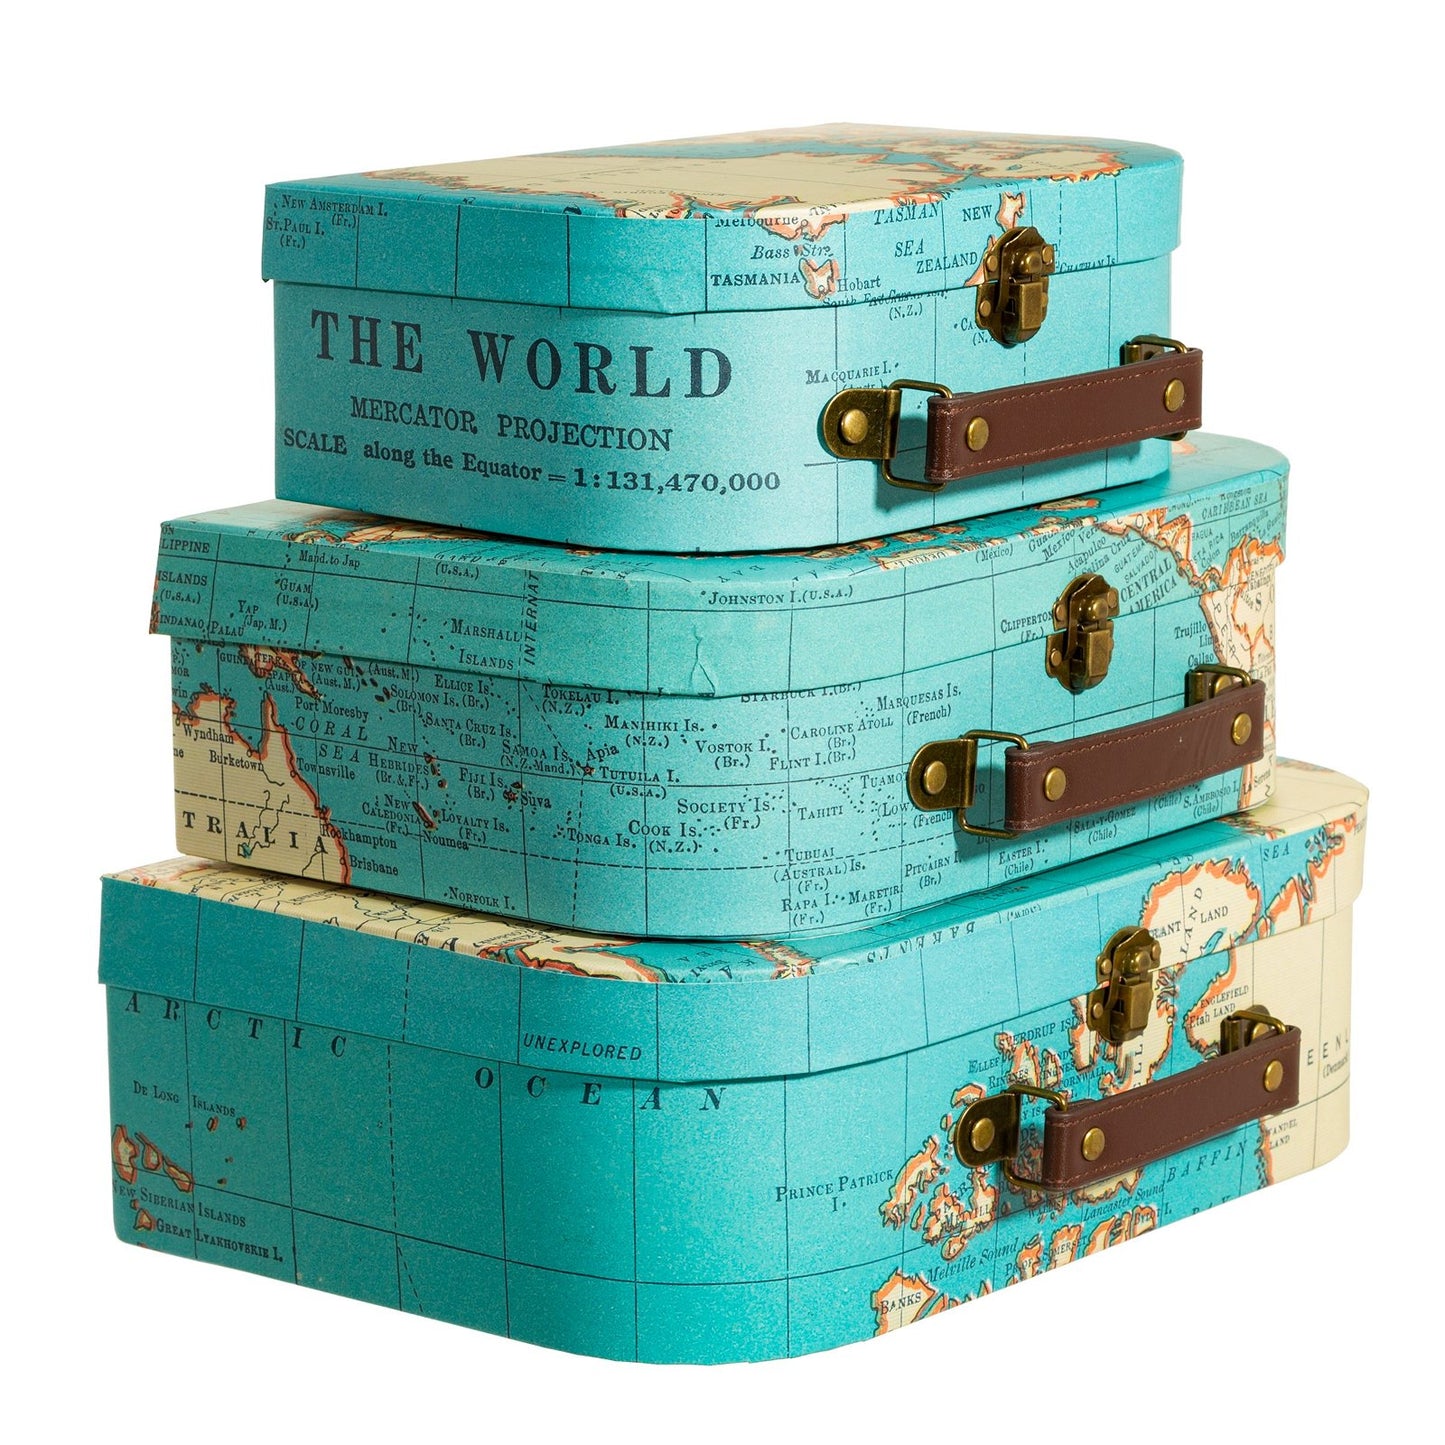 Vintage Map Suitcases - Set of 3